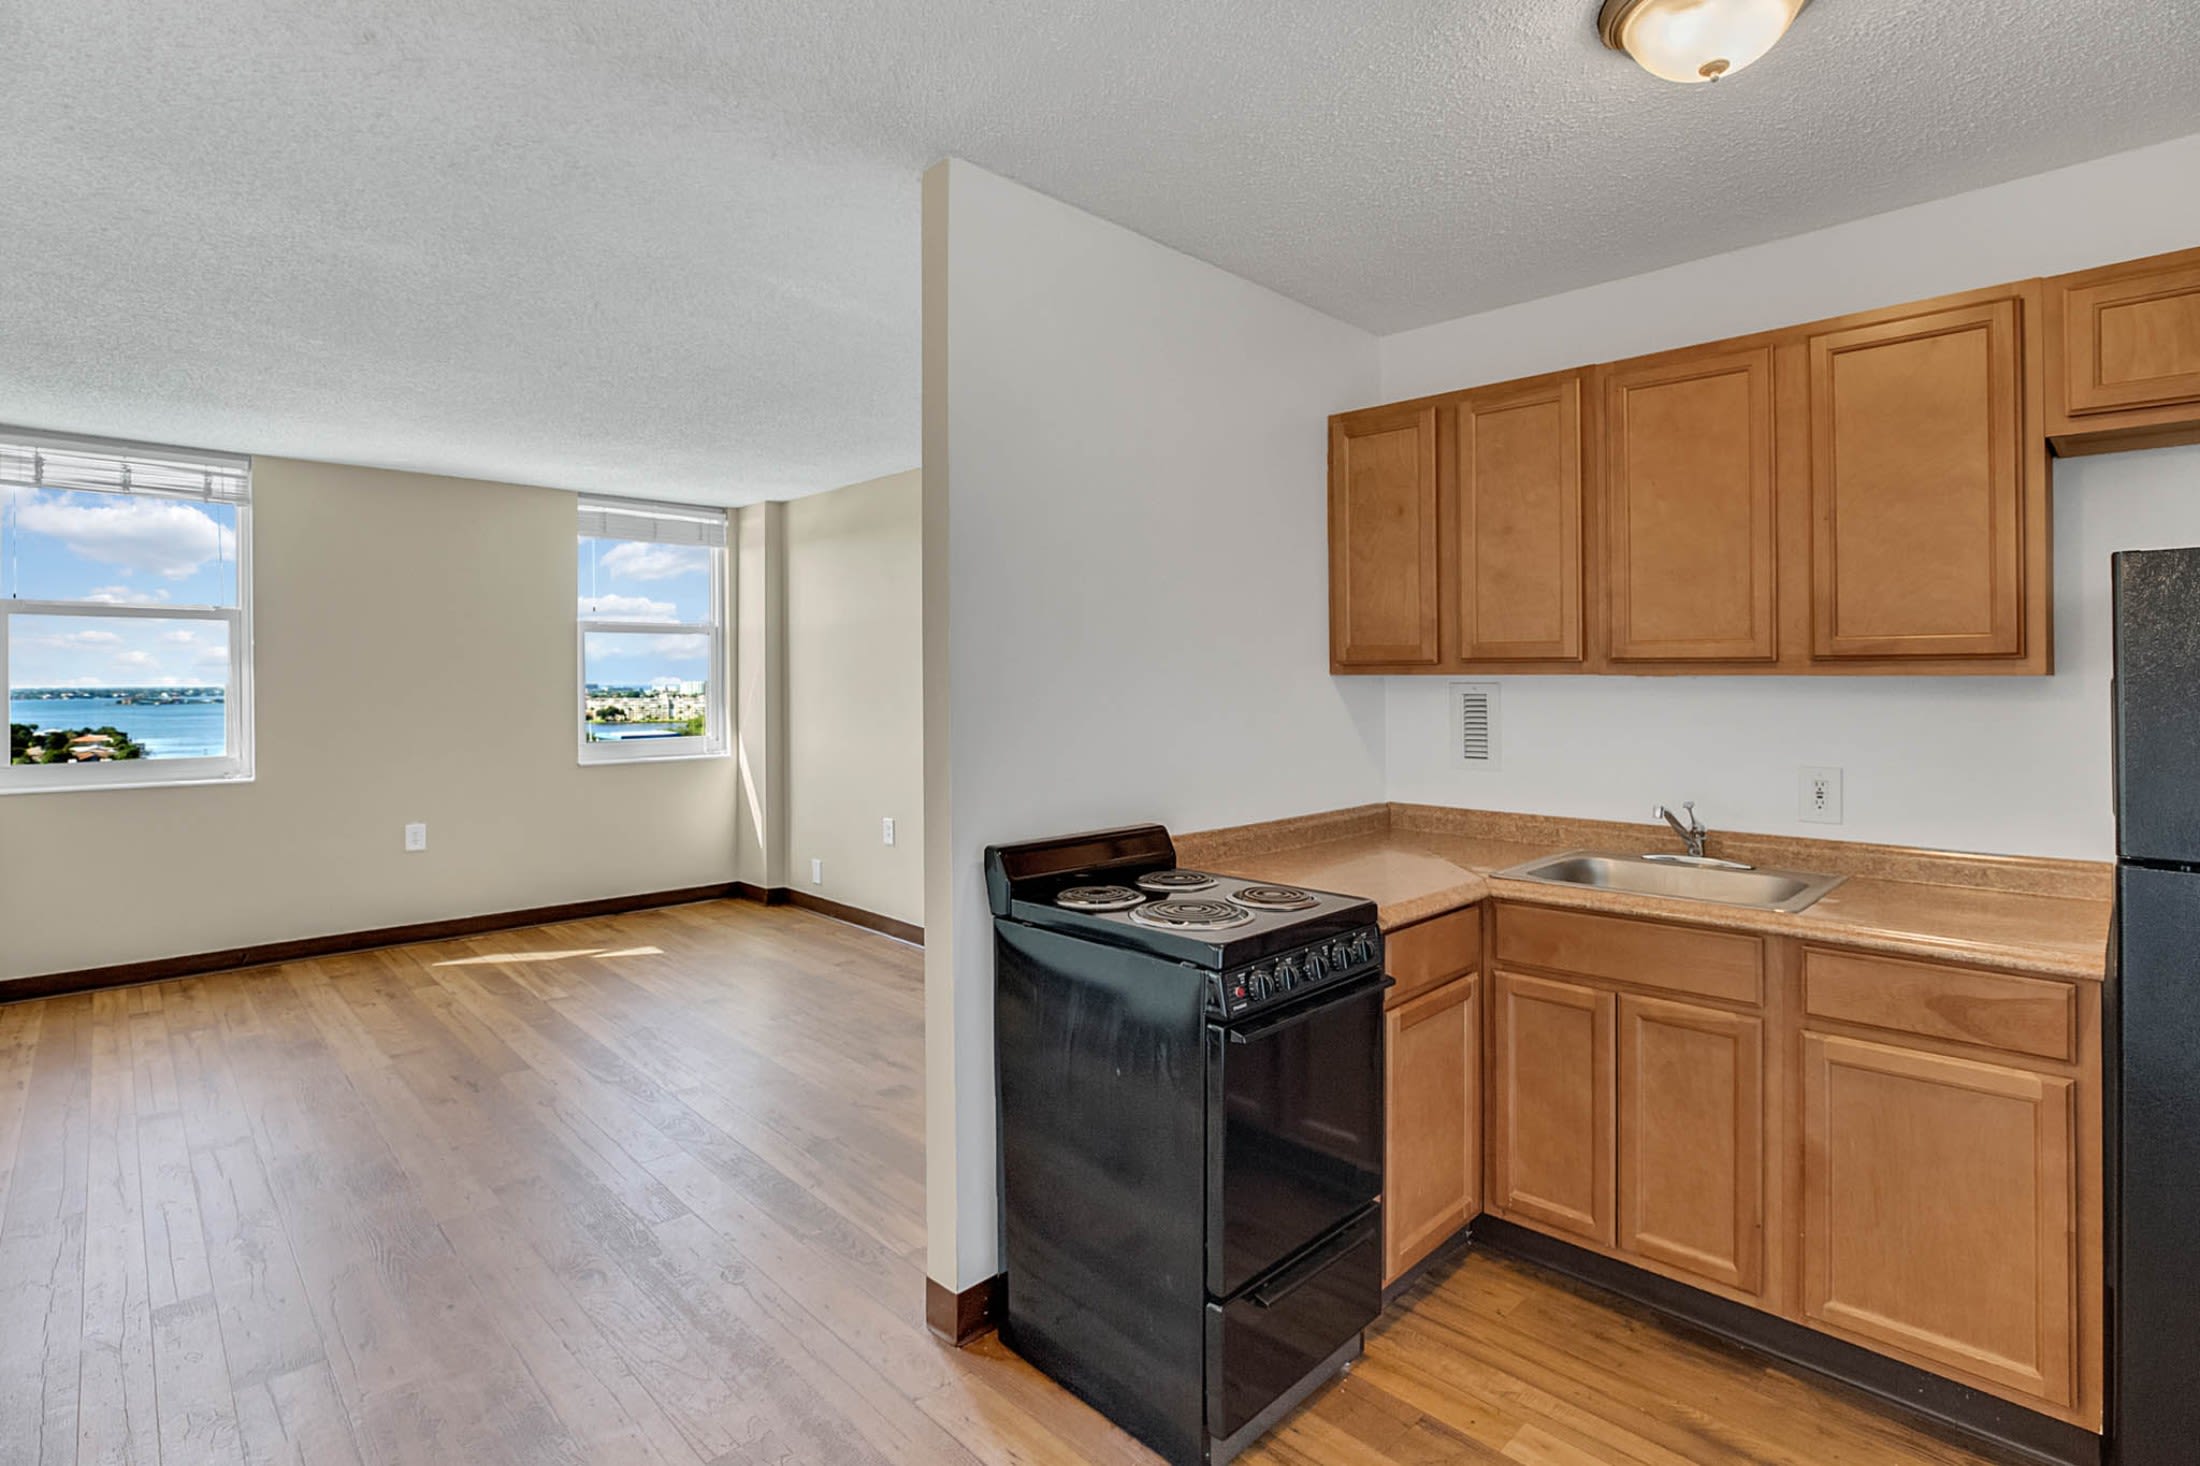 Apartment kitchen with black stove and wooden cabinets at Bay Pointe Tower in South Pasadena, Florida